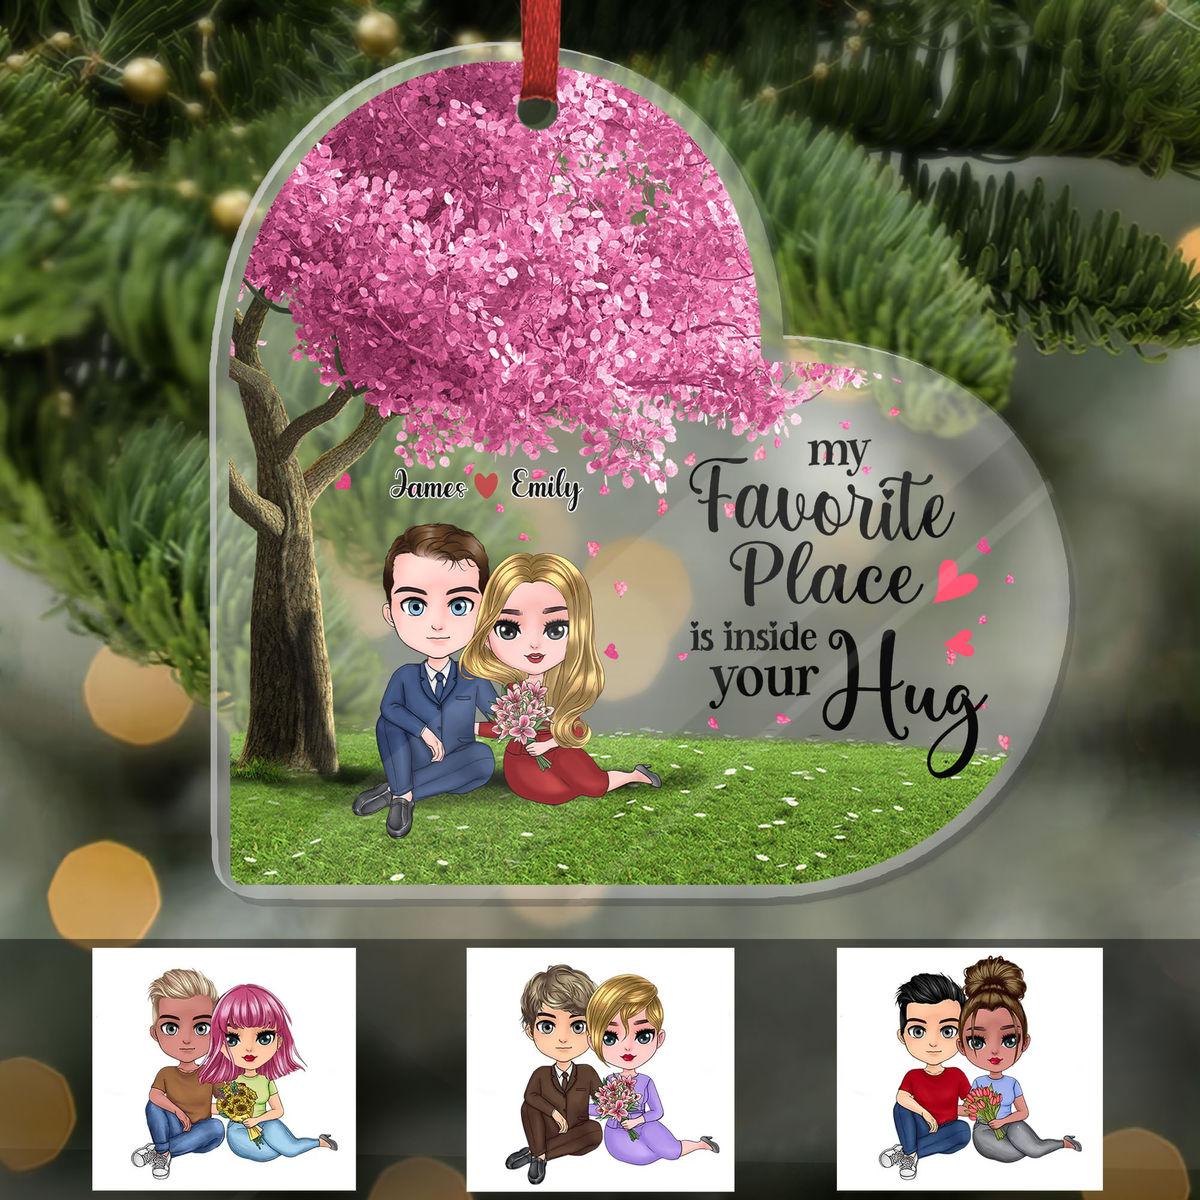 Transparent Ornament - Lover - My favorite place is inside your hug - Heart Shaped Acrylic Ornament